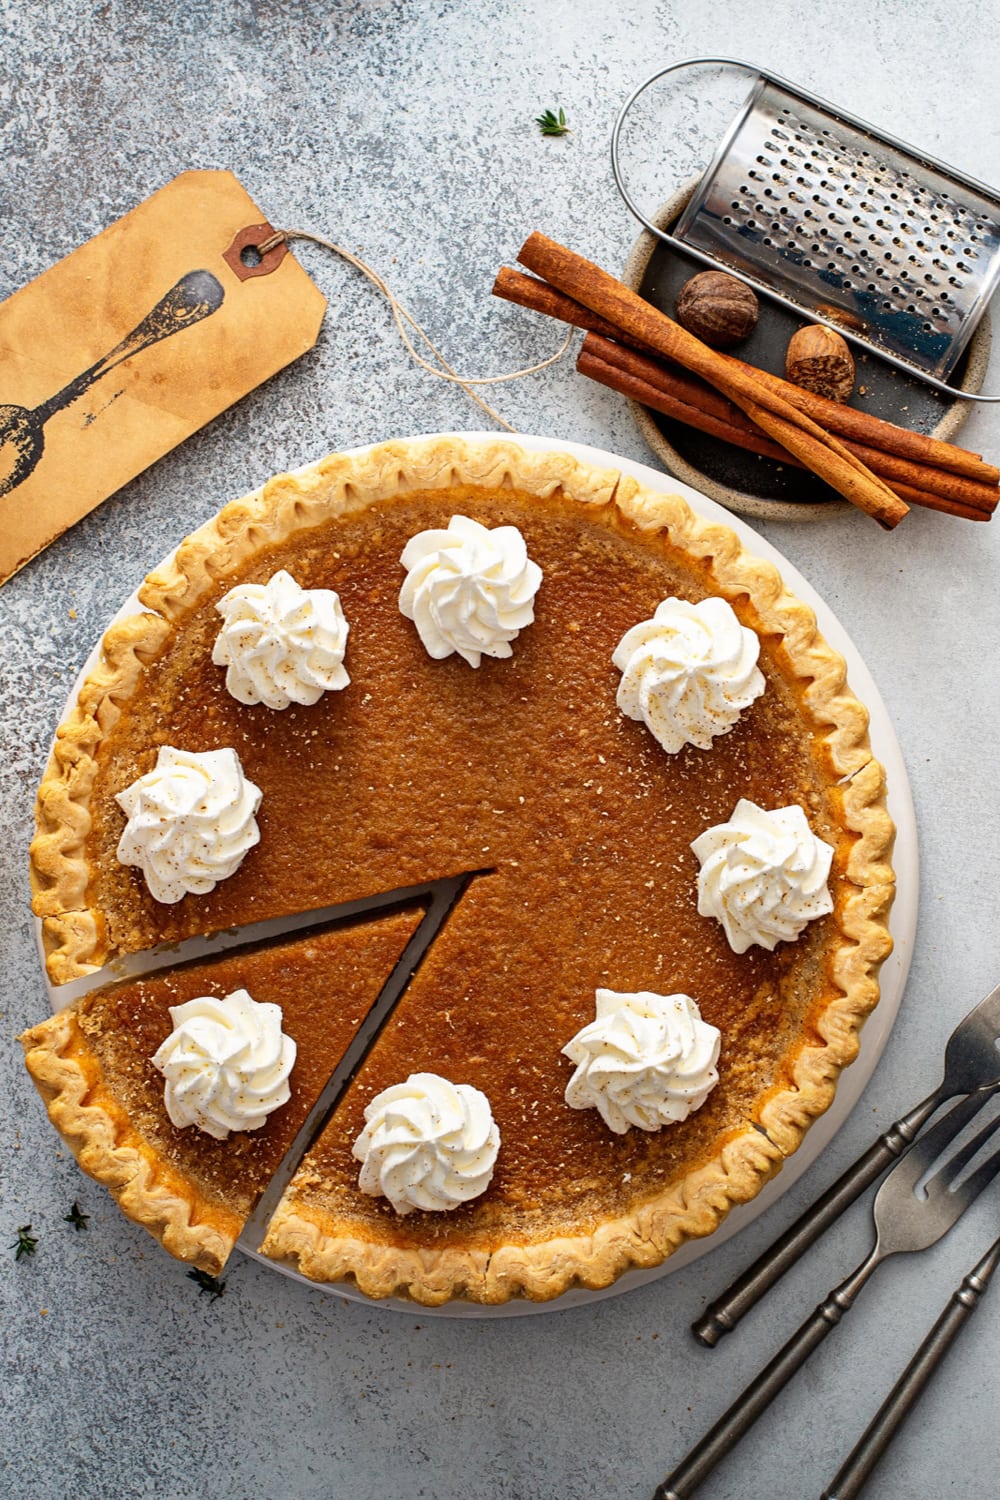 Top View Sweet Potato Pie with Whipped Cream and Cinnamon